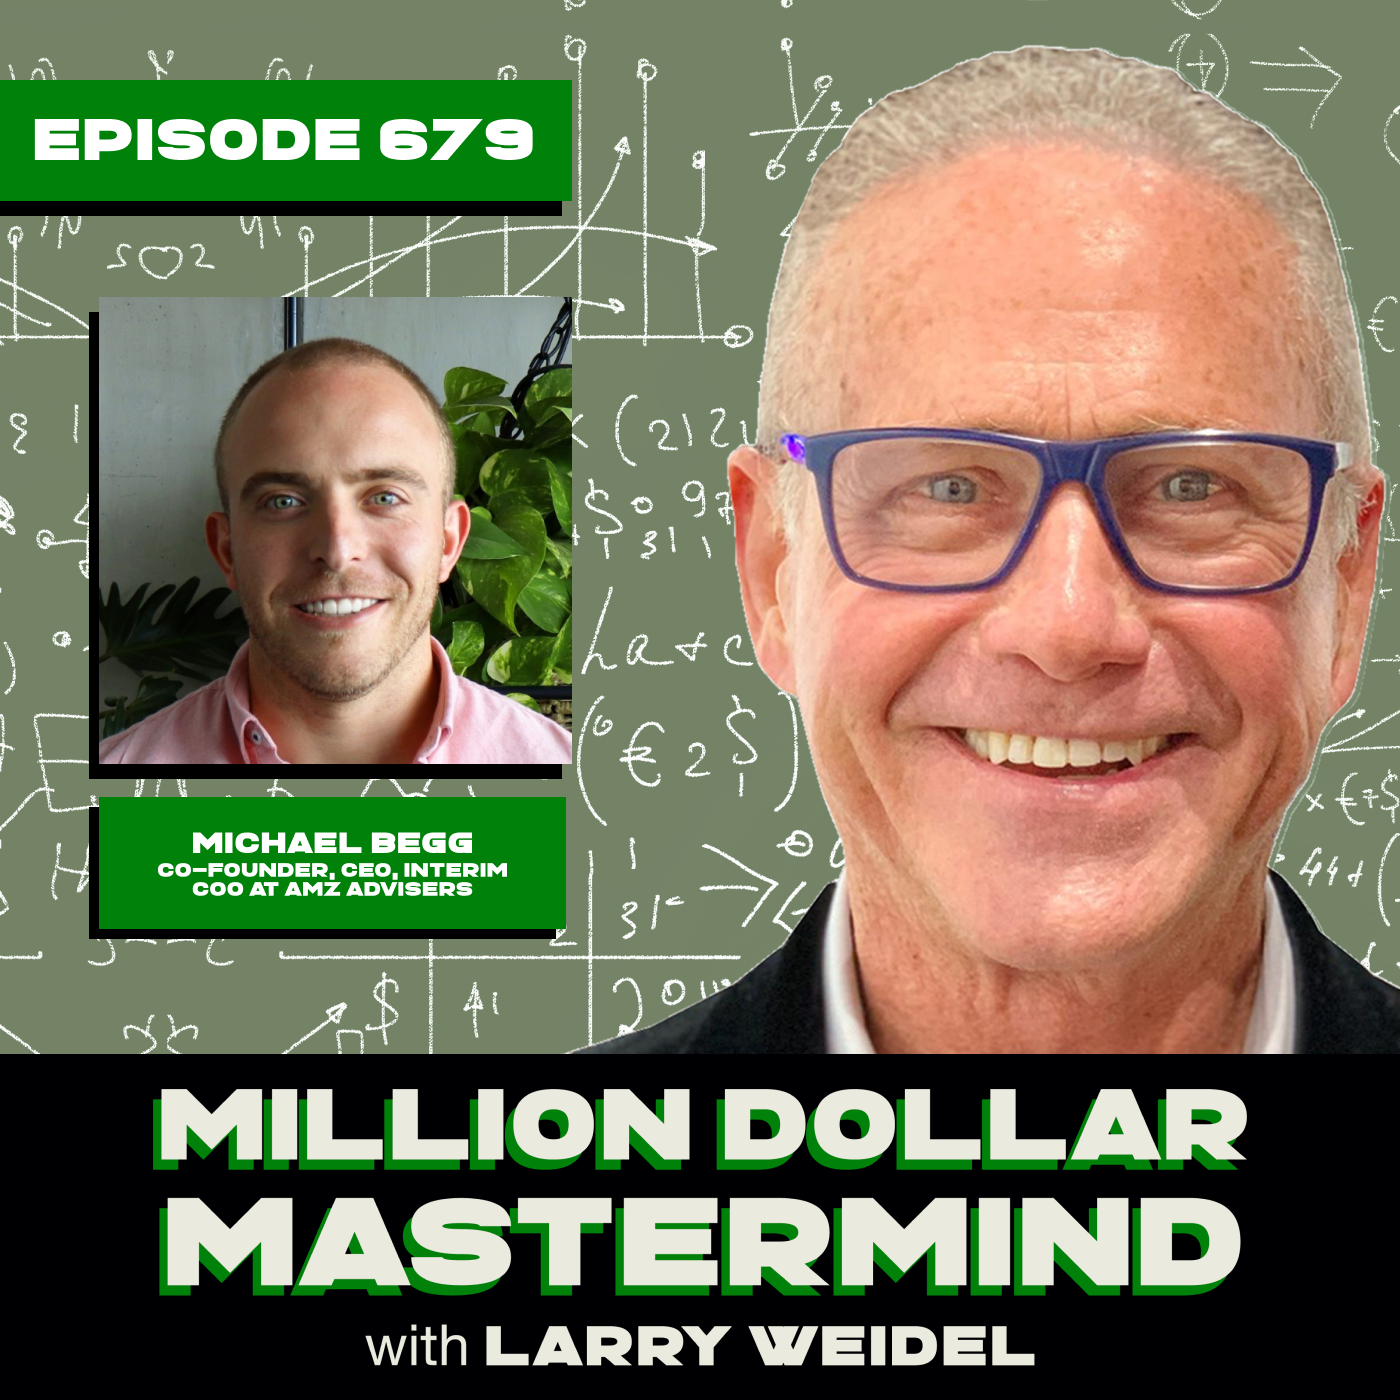 Episode #679 - Success Can Come From Your Weaknesses with Mike Begg, Co-Founder of AMZ Advisors